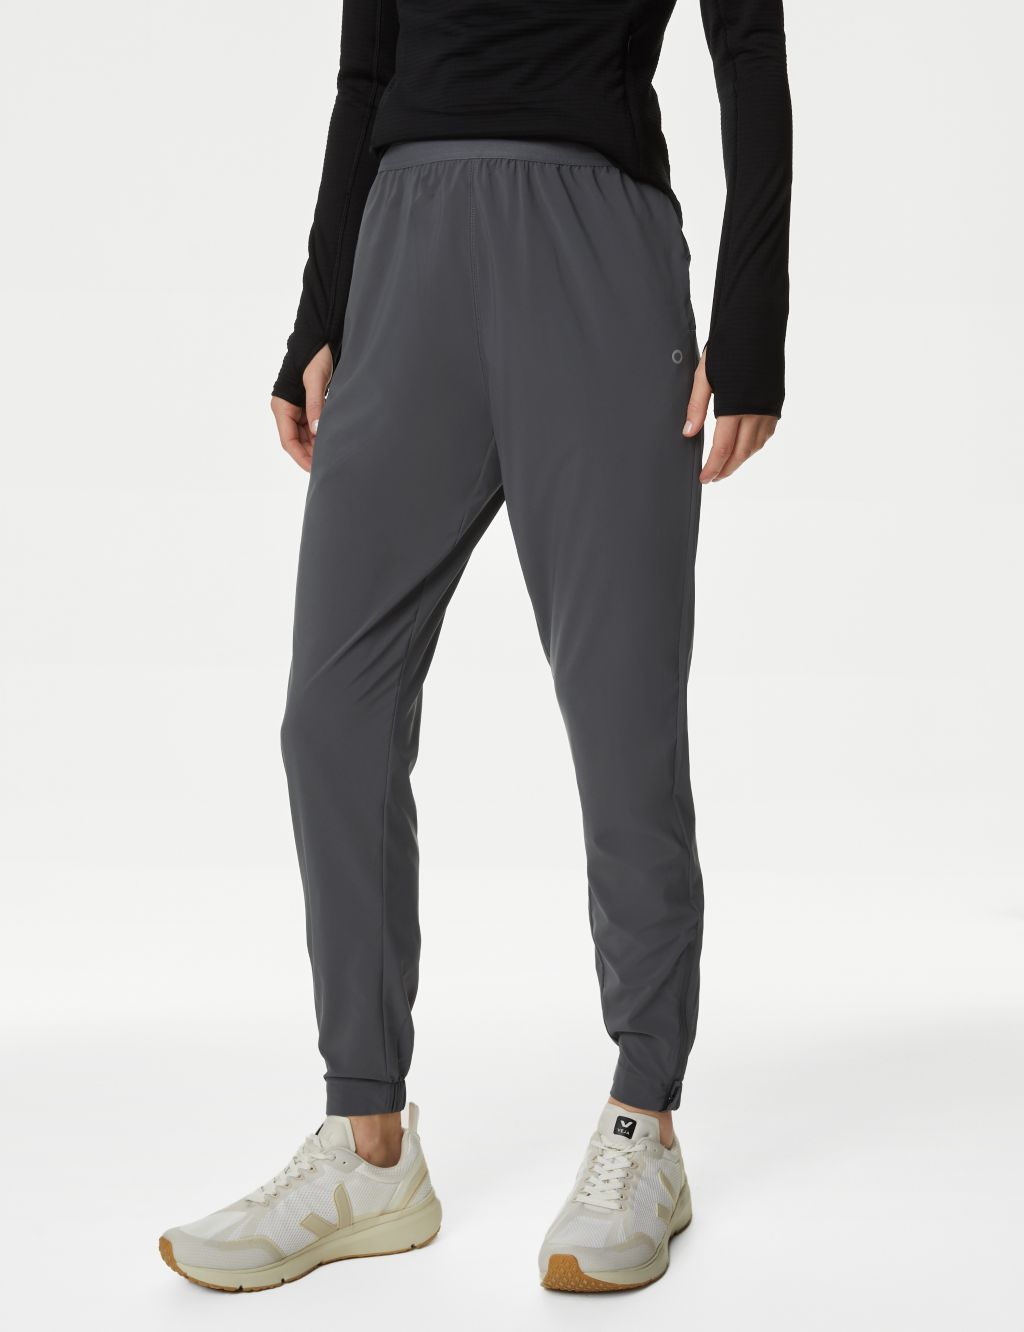 Woven High Waisted Tapered Track Pants image 4